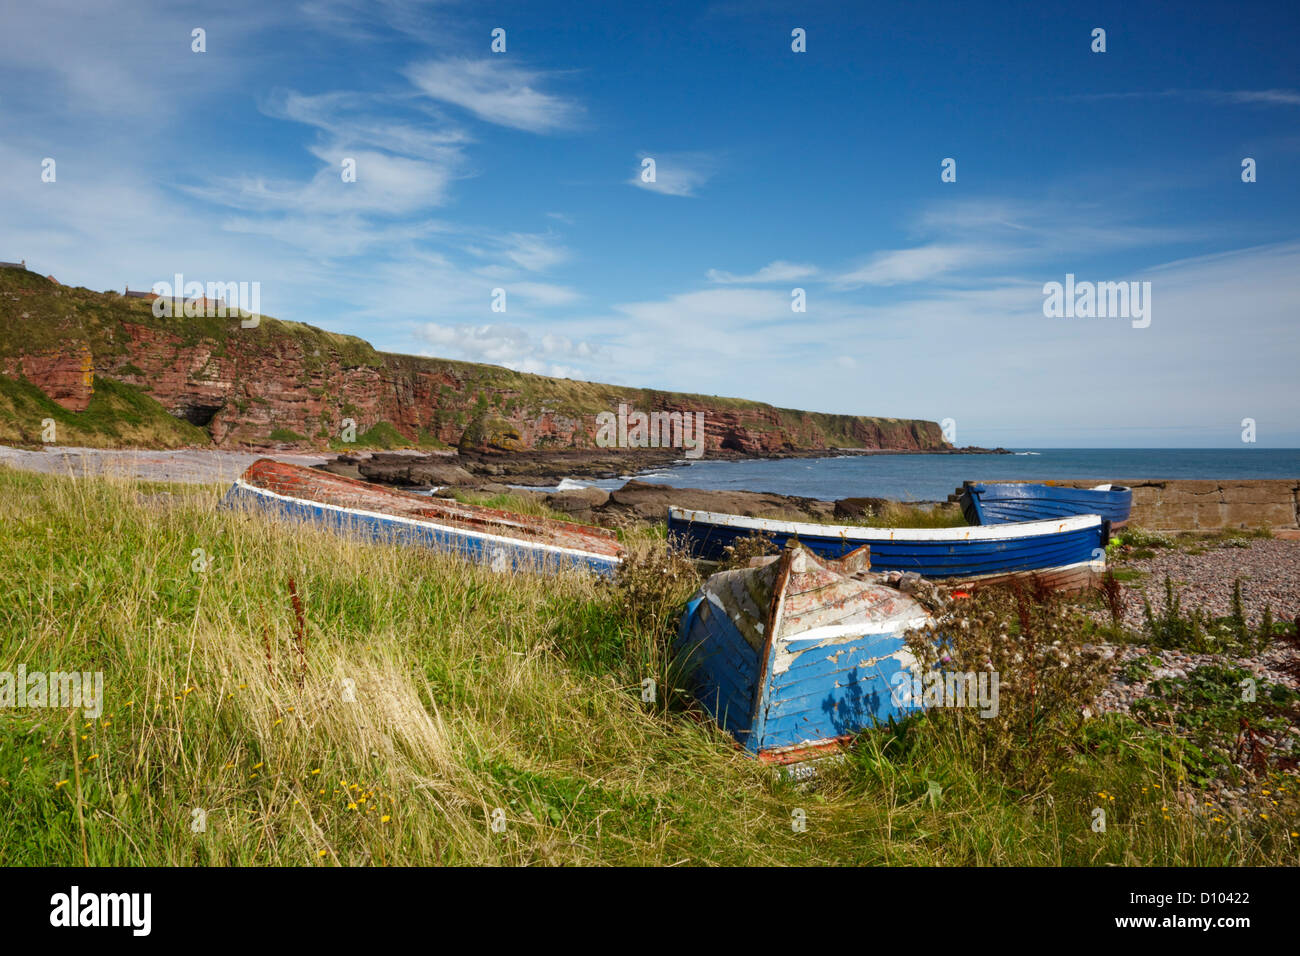 Fishing boats at Auchmithie, Angus, Scotland Stock Photo